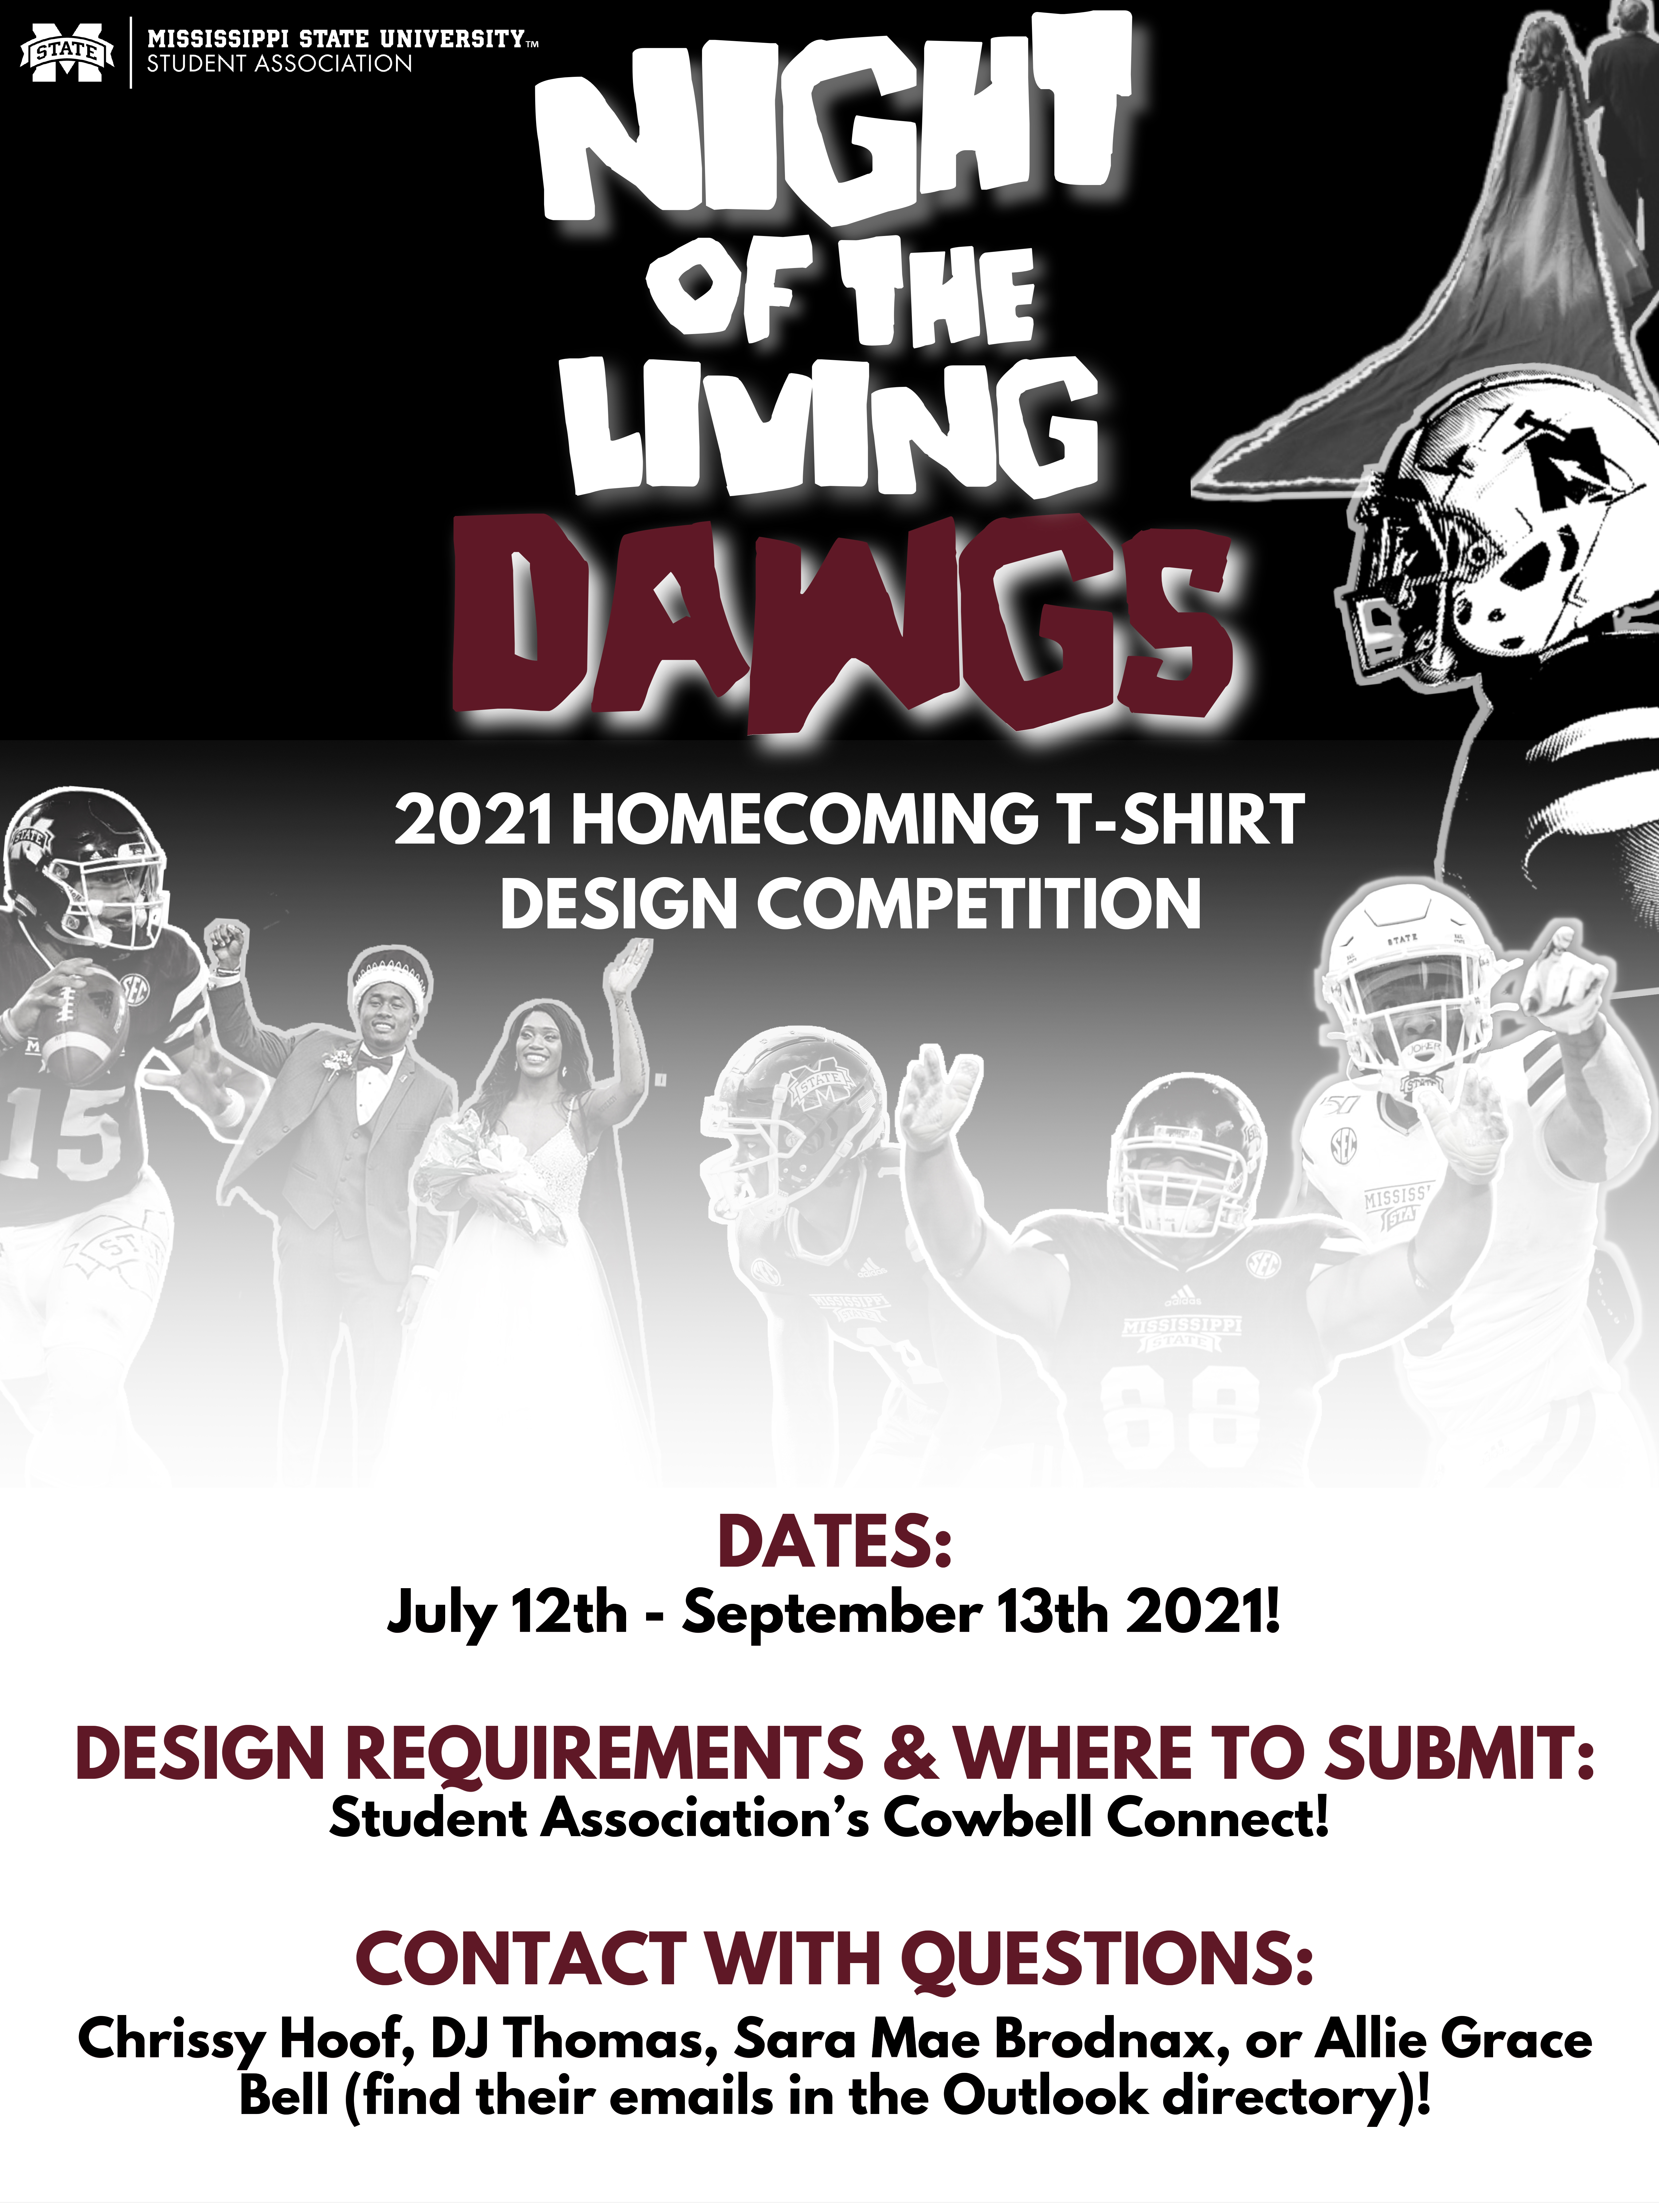 Maroon, black and white "Night of the Living Dawgs" Homecoming T-shirt Design Competition graphic with images of former MSU student-athletes